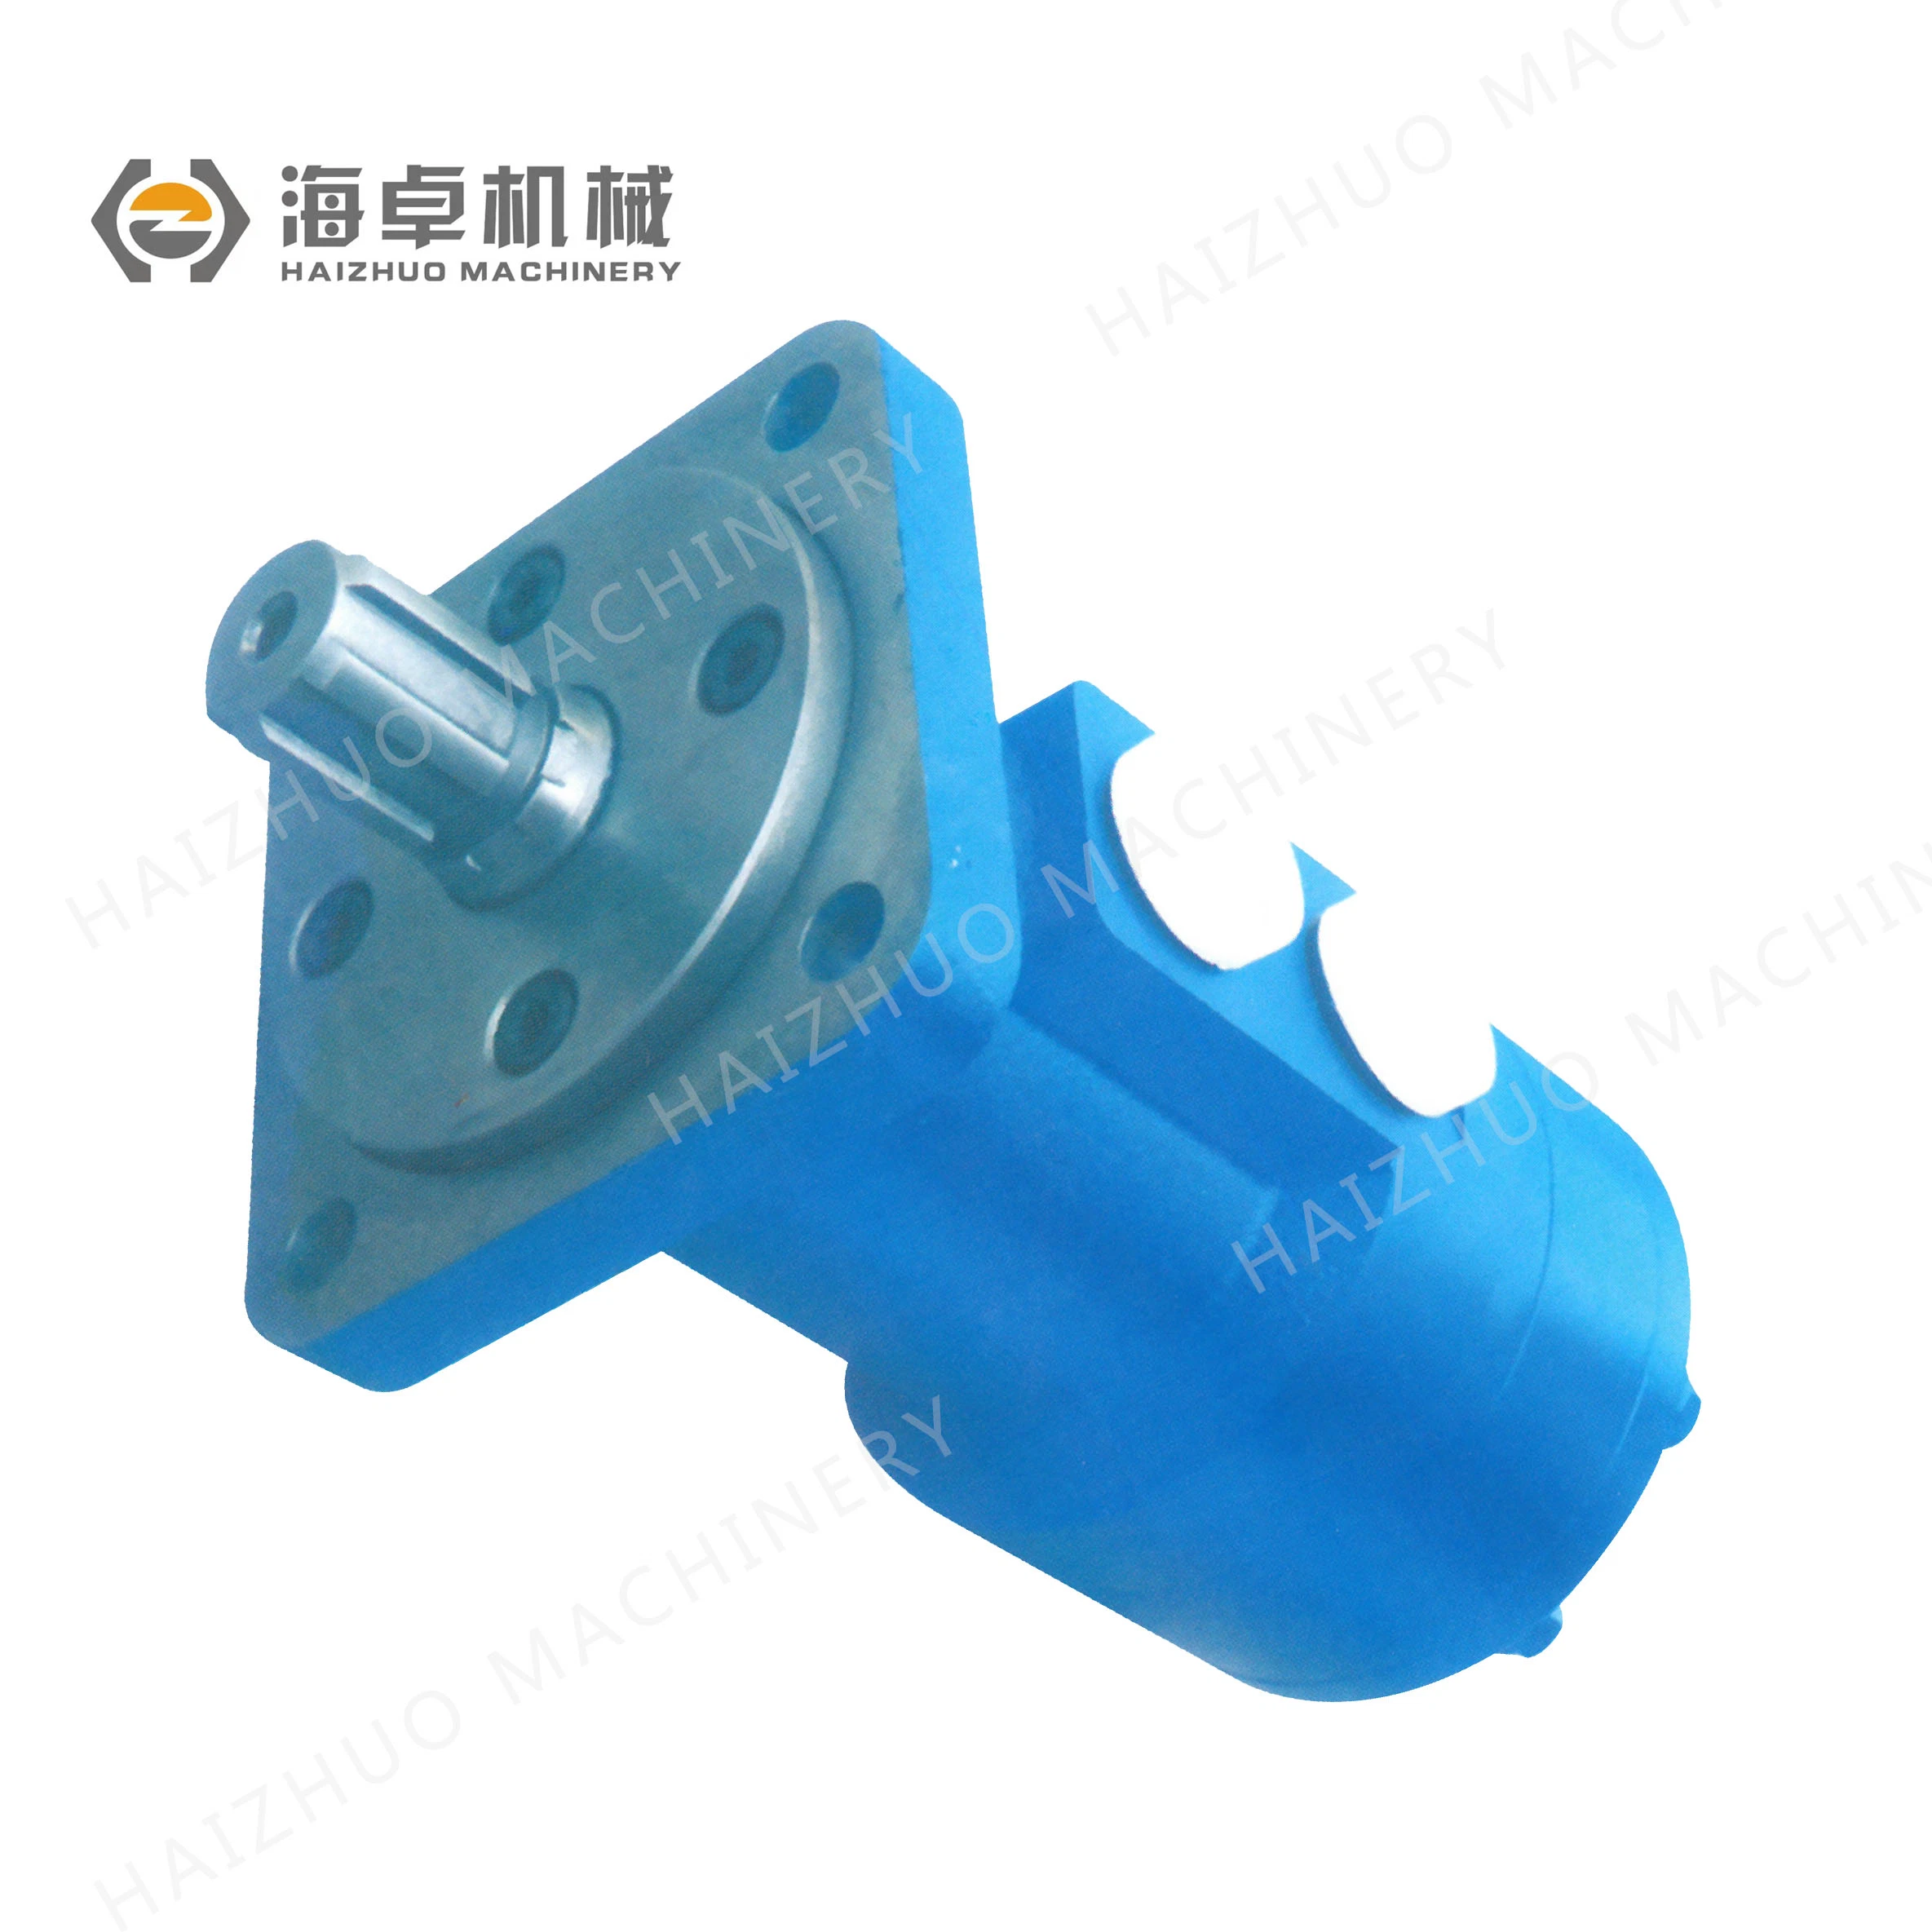 Bm6 Hydraulic Motor, Cycloid Motor for Petroleum & Coal Machine Special Vehicles